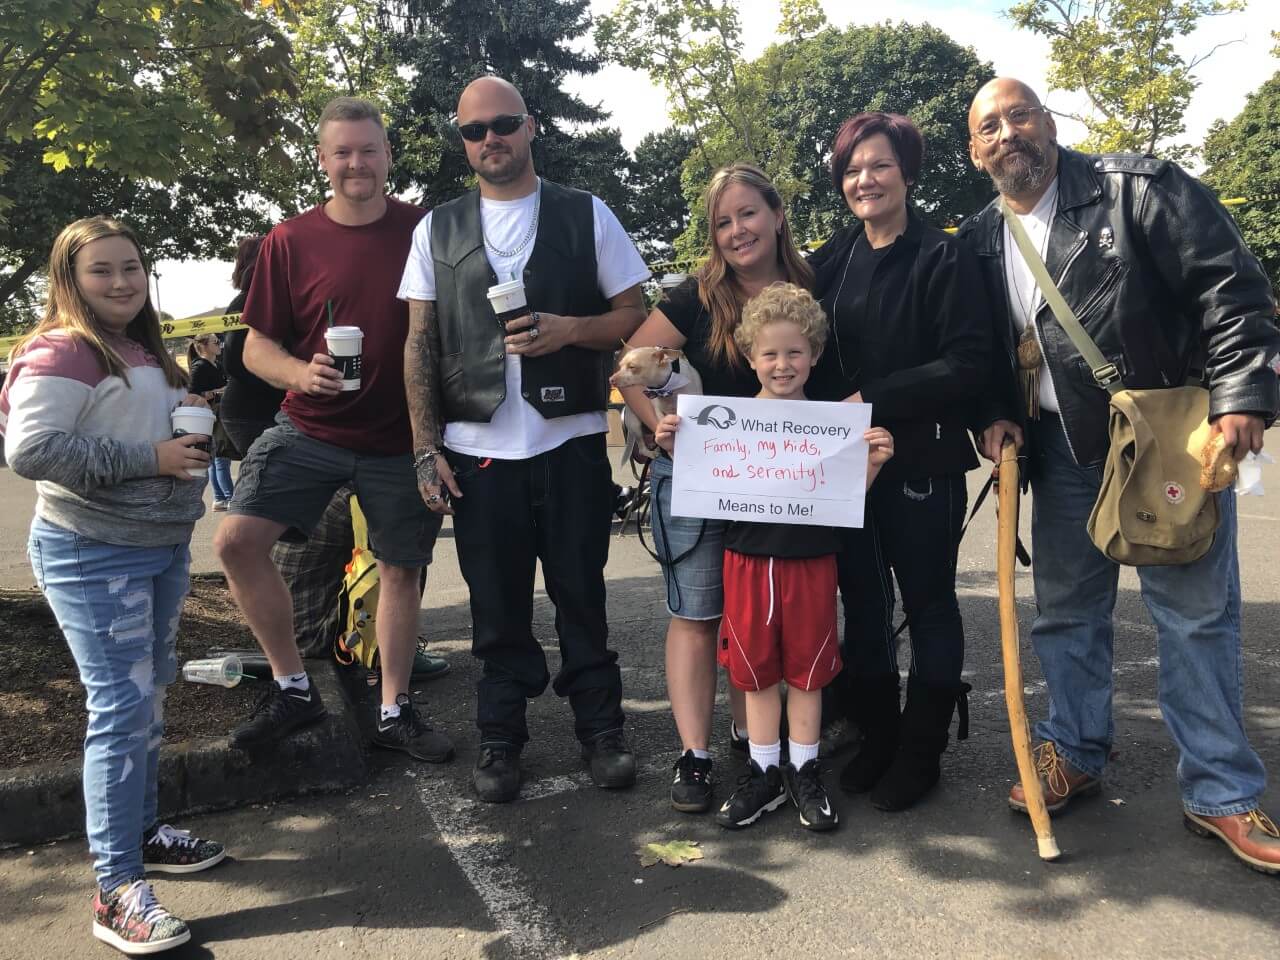 Group of people with child holding sign